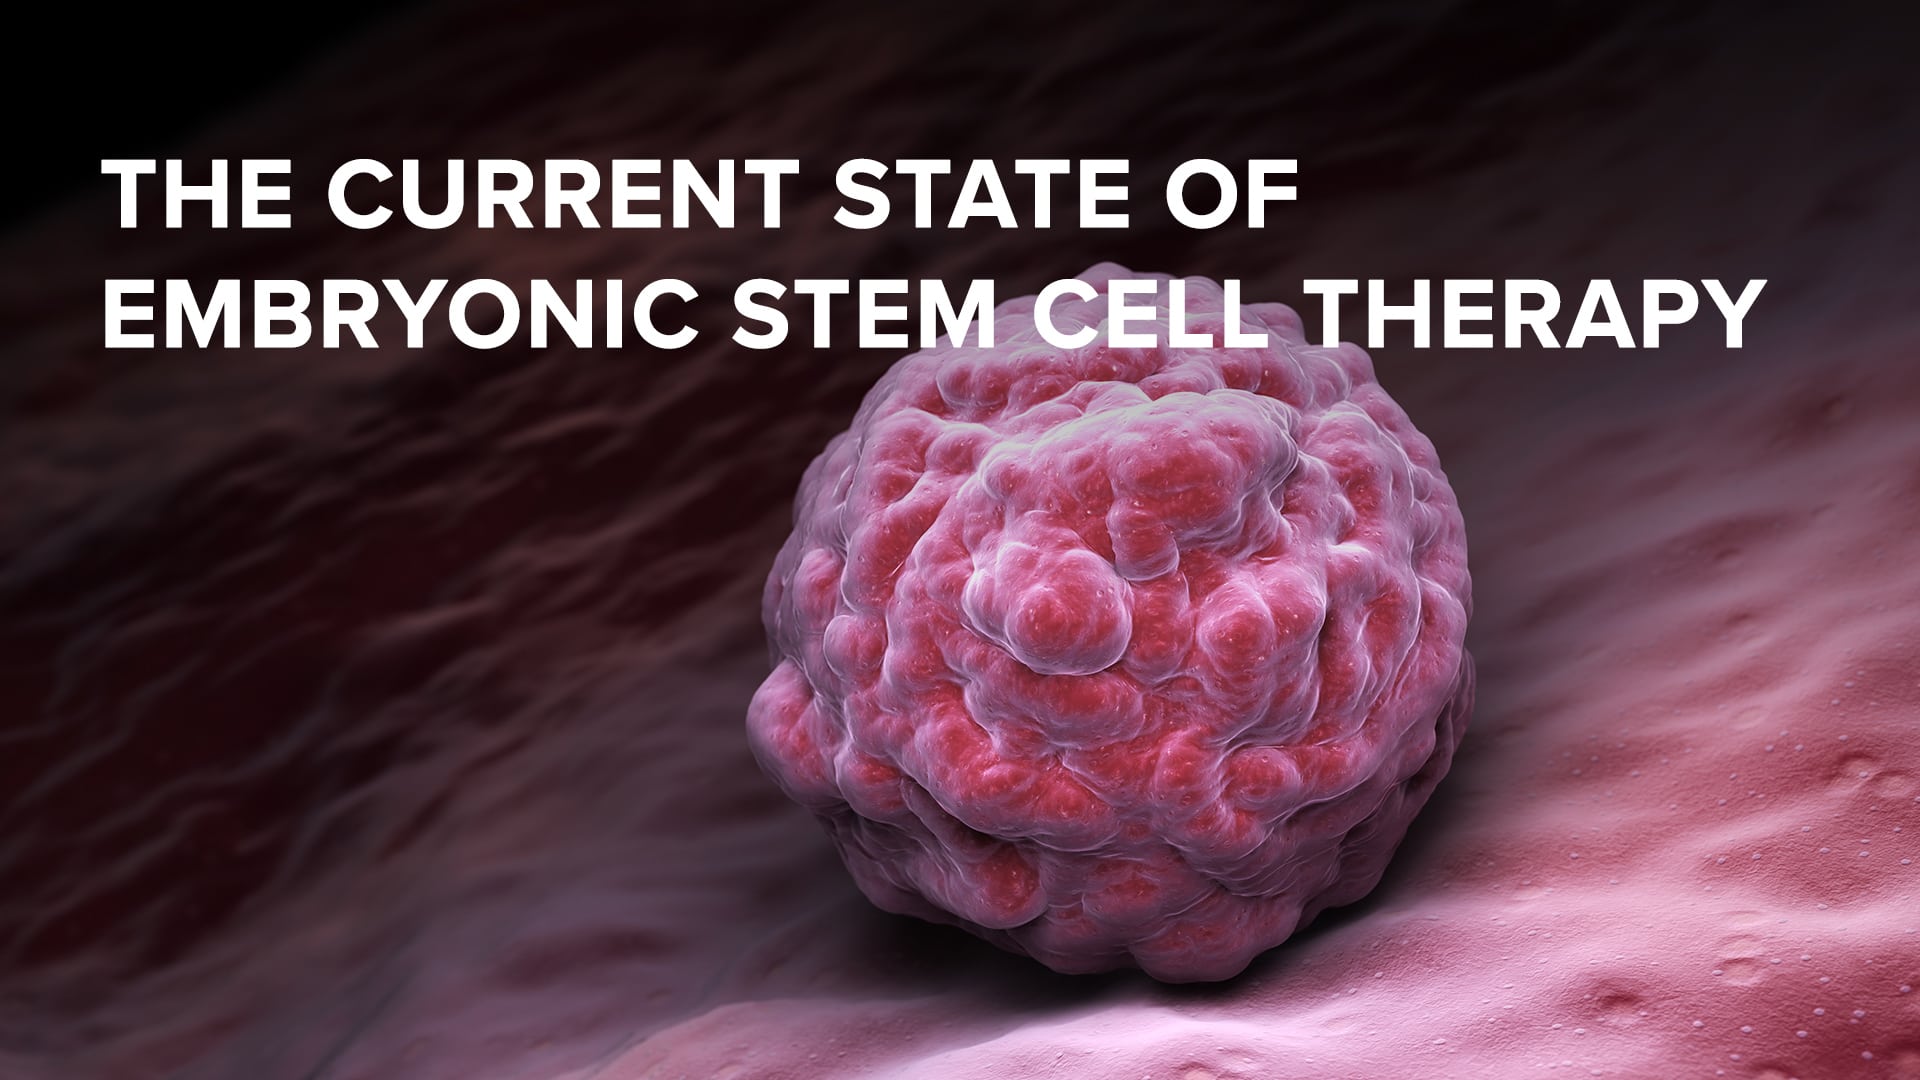 The Current State of Embryonic Stem Cell Therapy